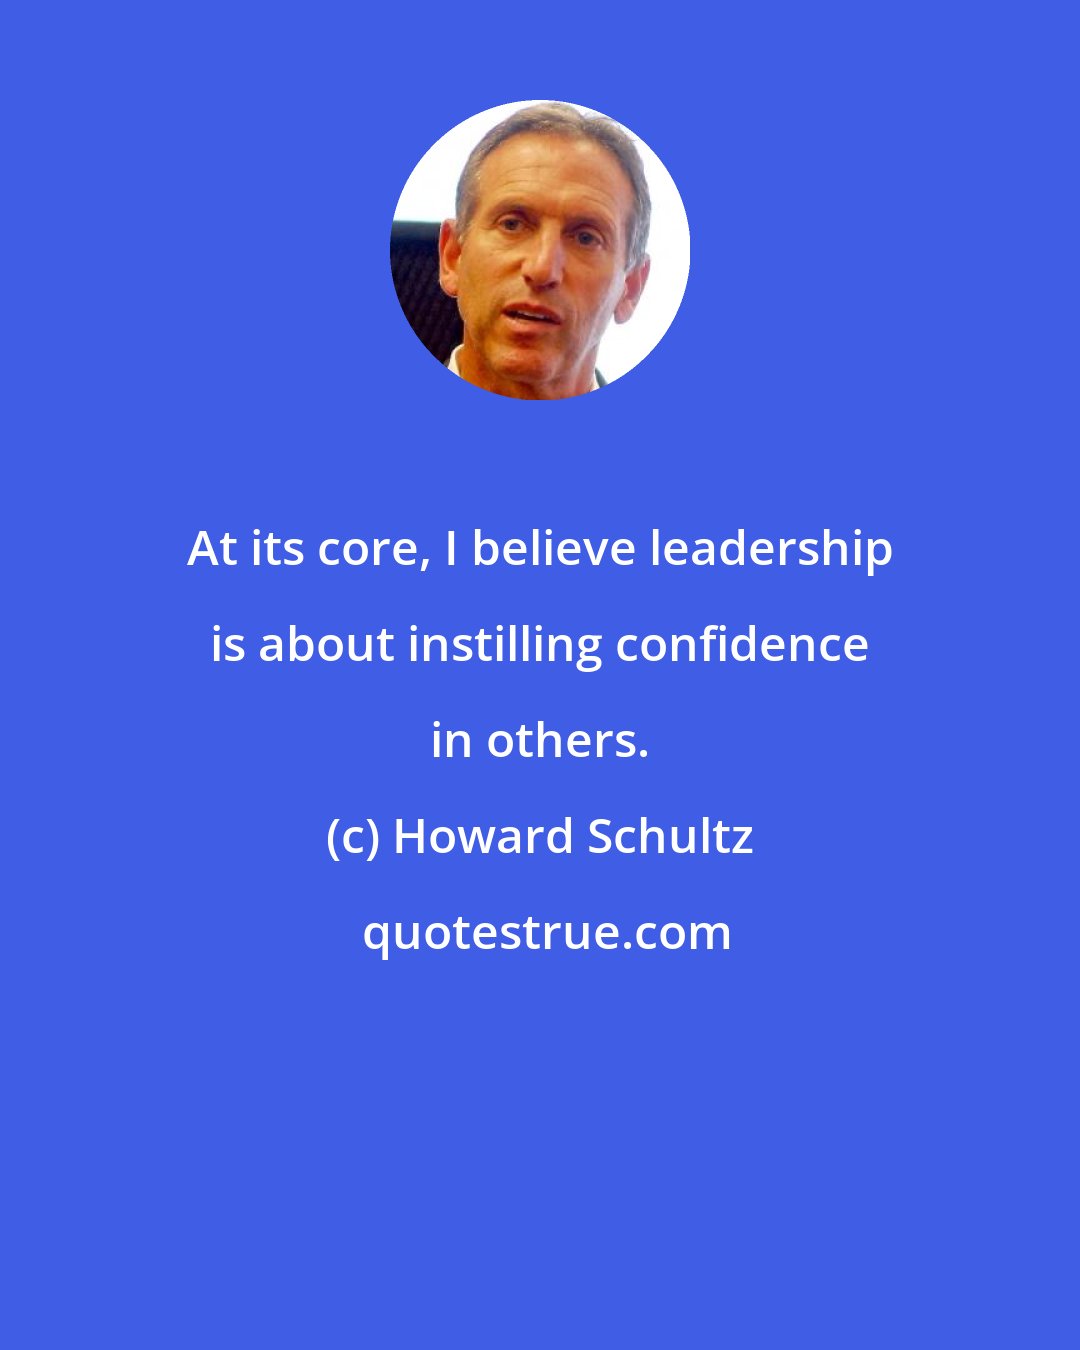 Howard Schultz: At its core, I believe leadership is about instilling confidence in others.